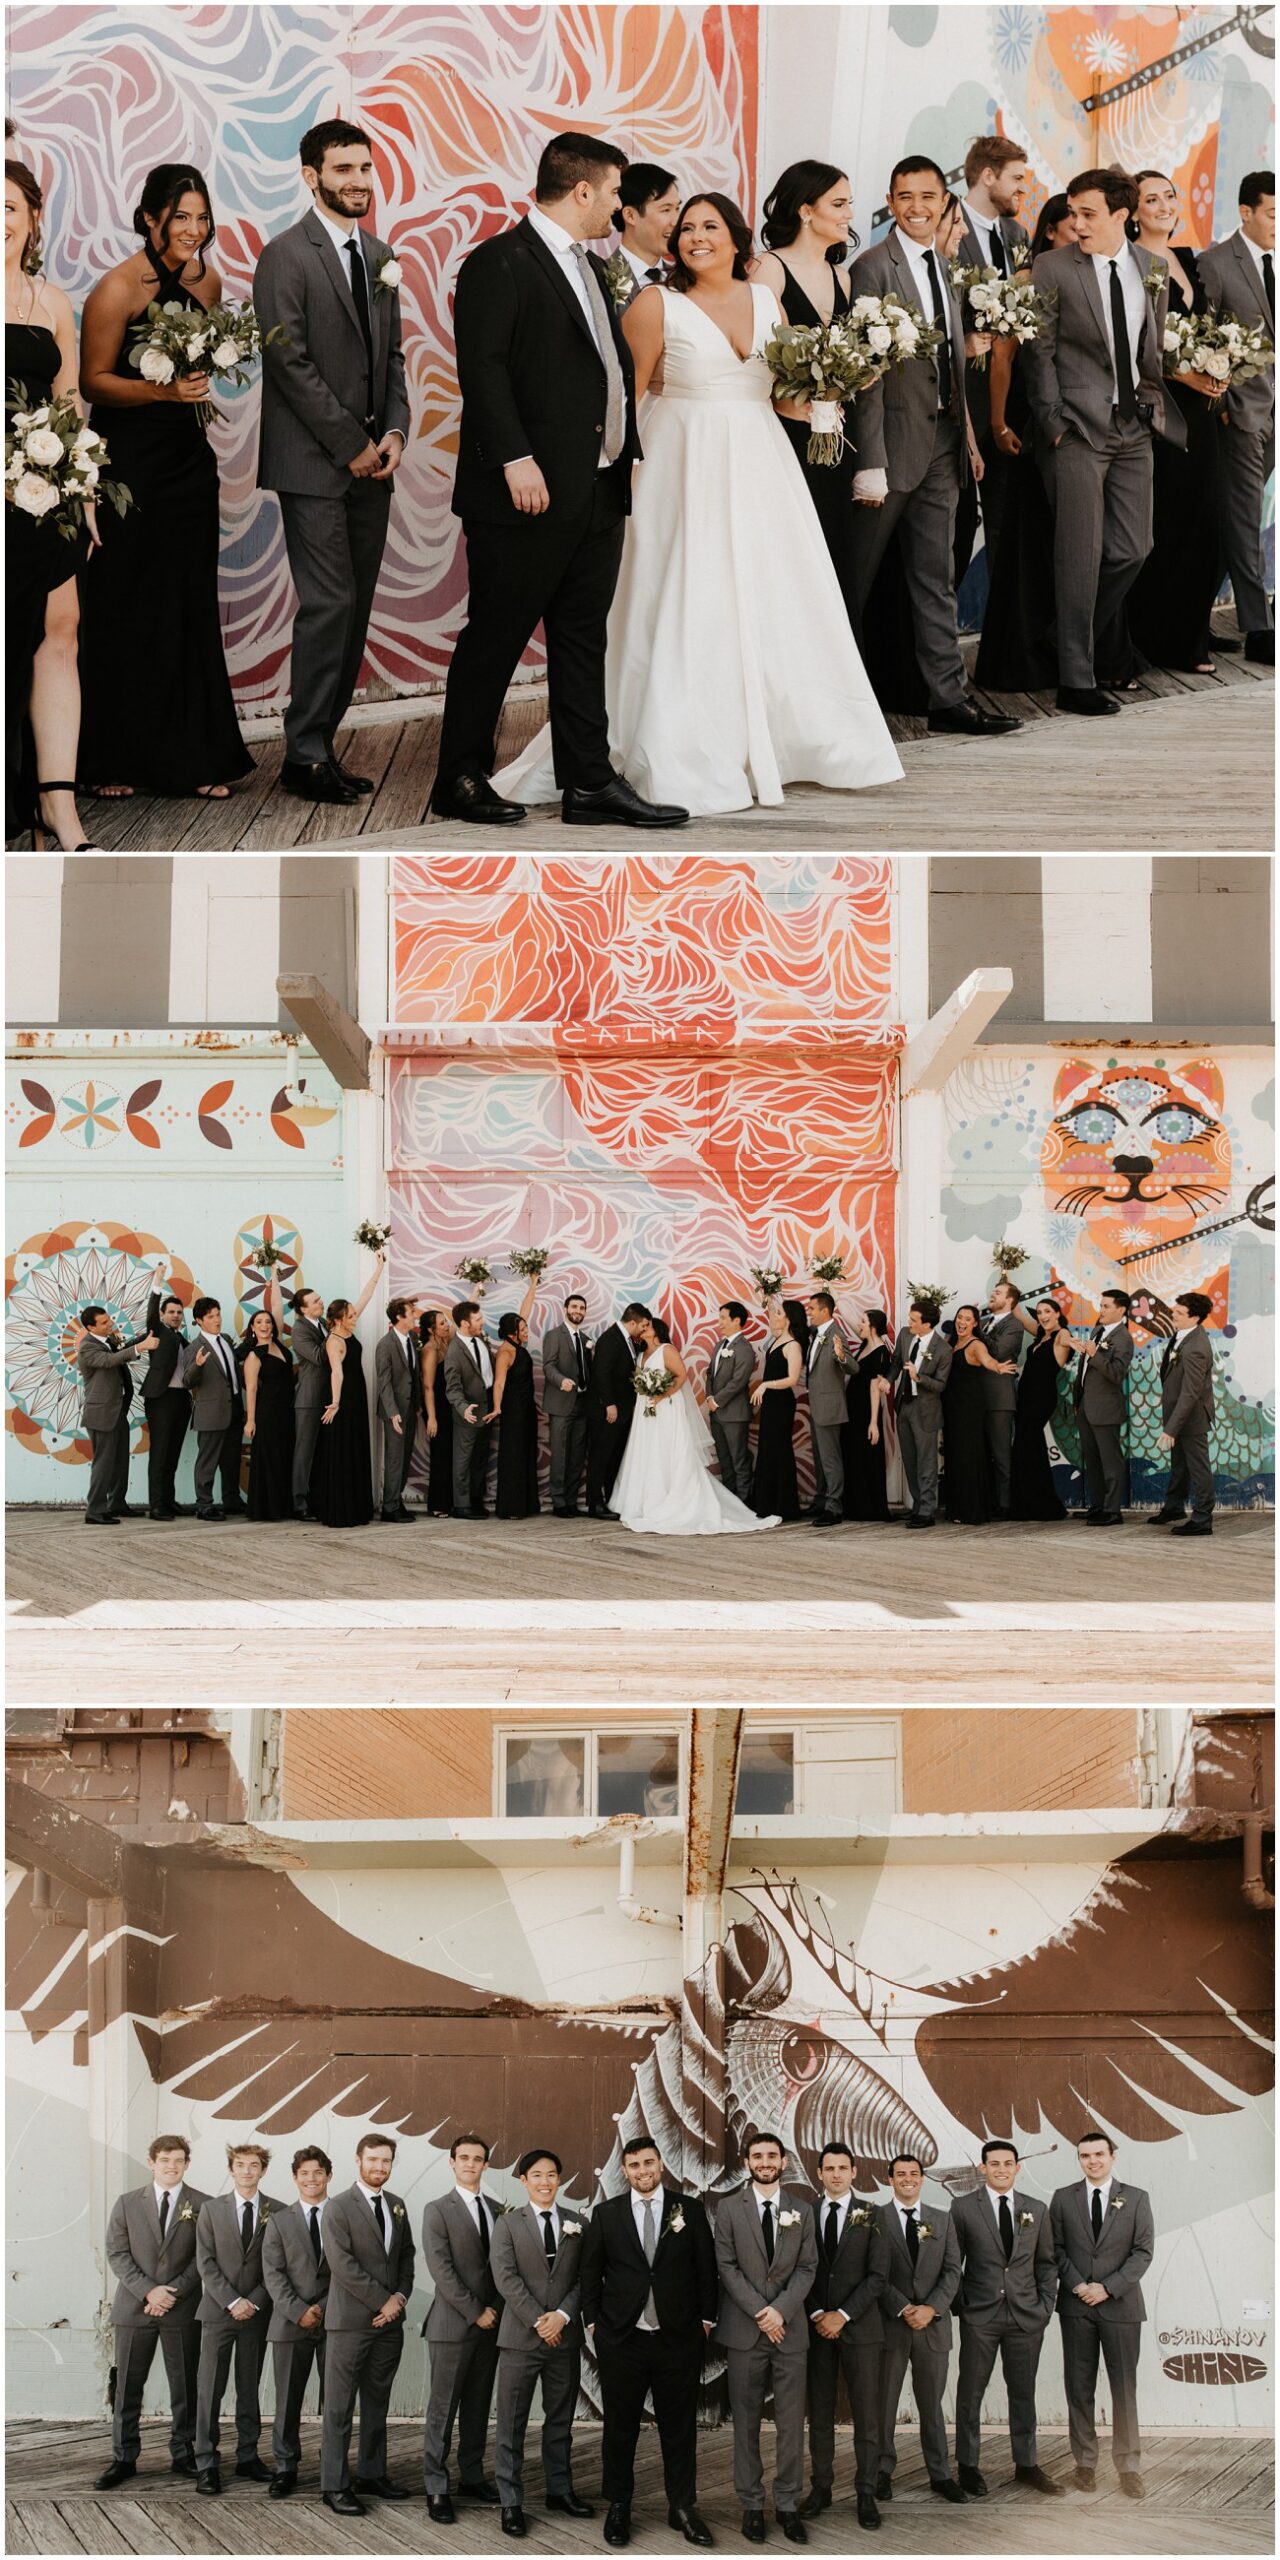 Collage of Bride and Groom with their bridal party in front of mural wall on the Asbury Park boardwalk